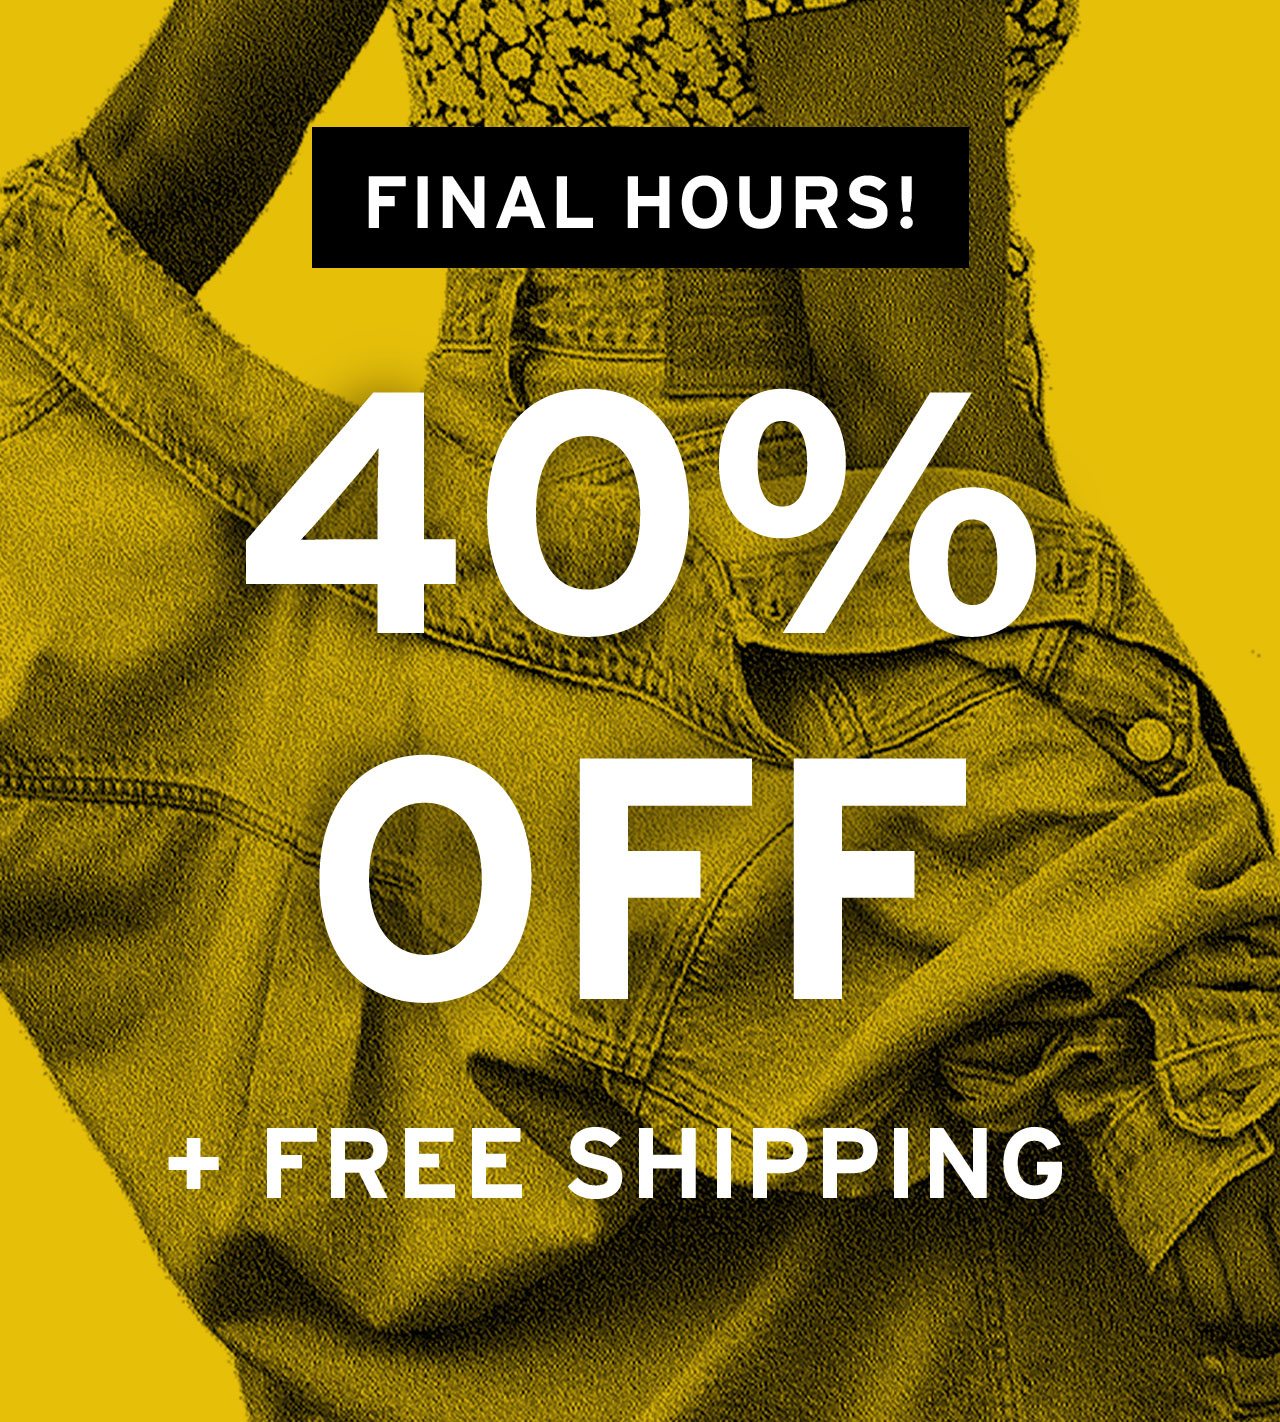 FINAL HOURS: 40% OFF + FREE SHIPPING | SHOP CYBER FLASH SALE